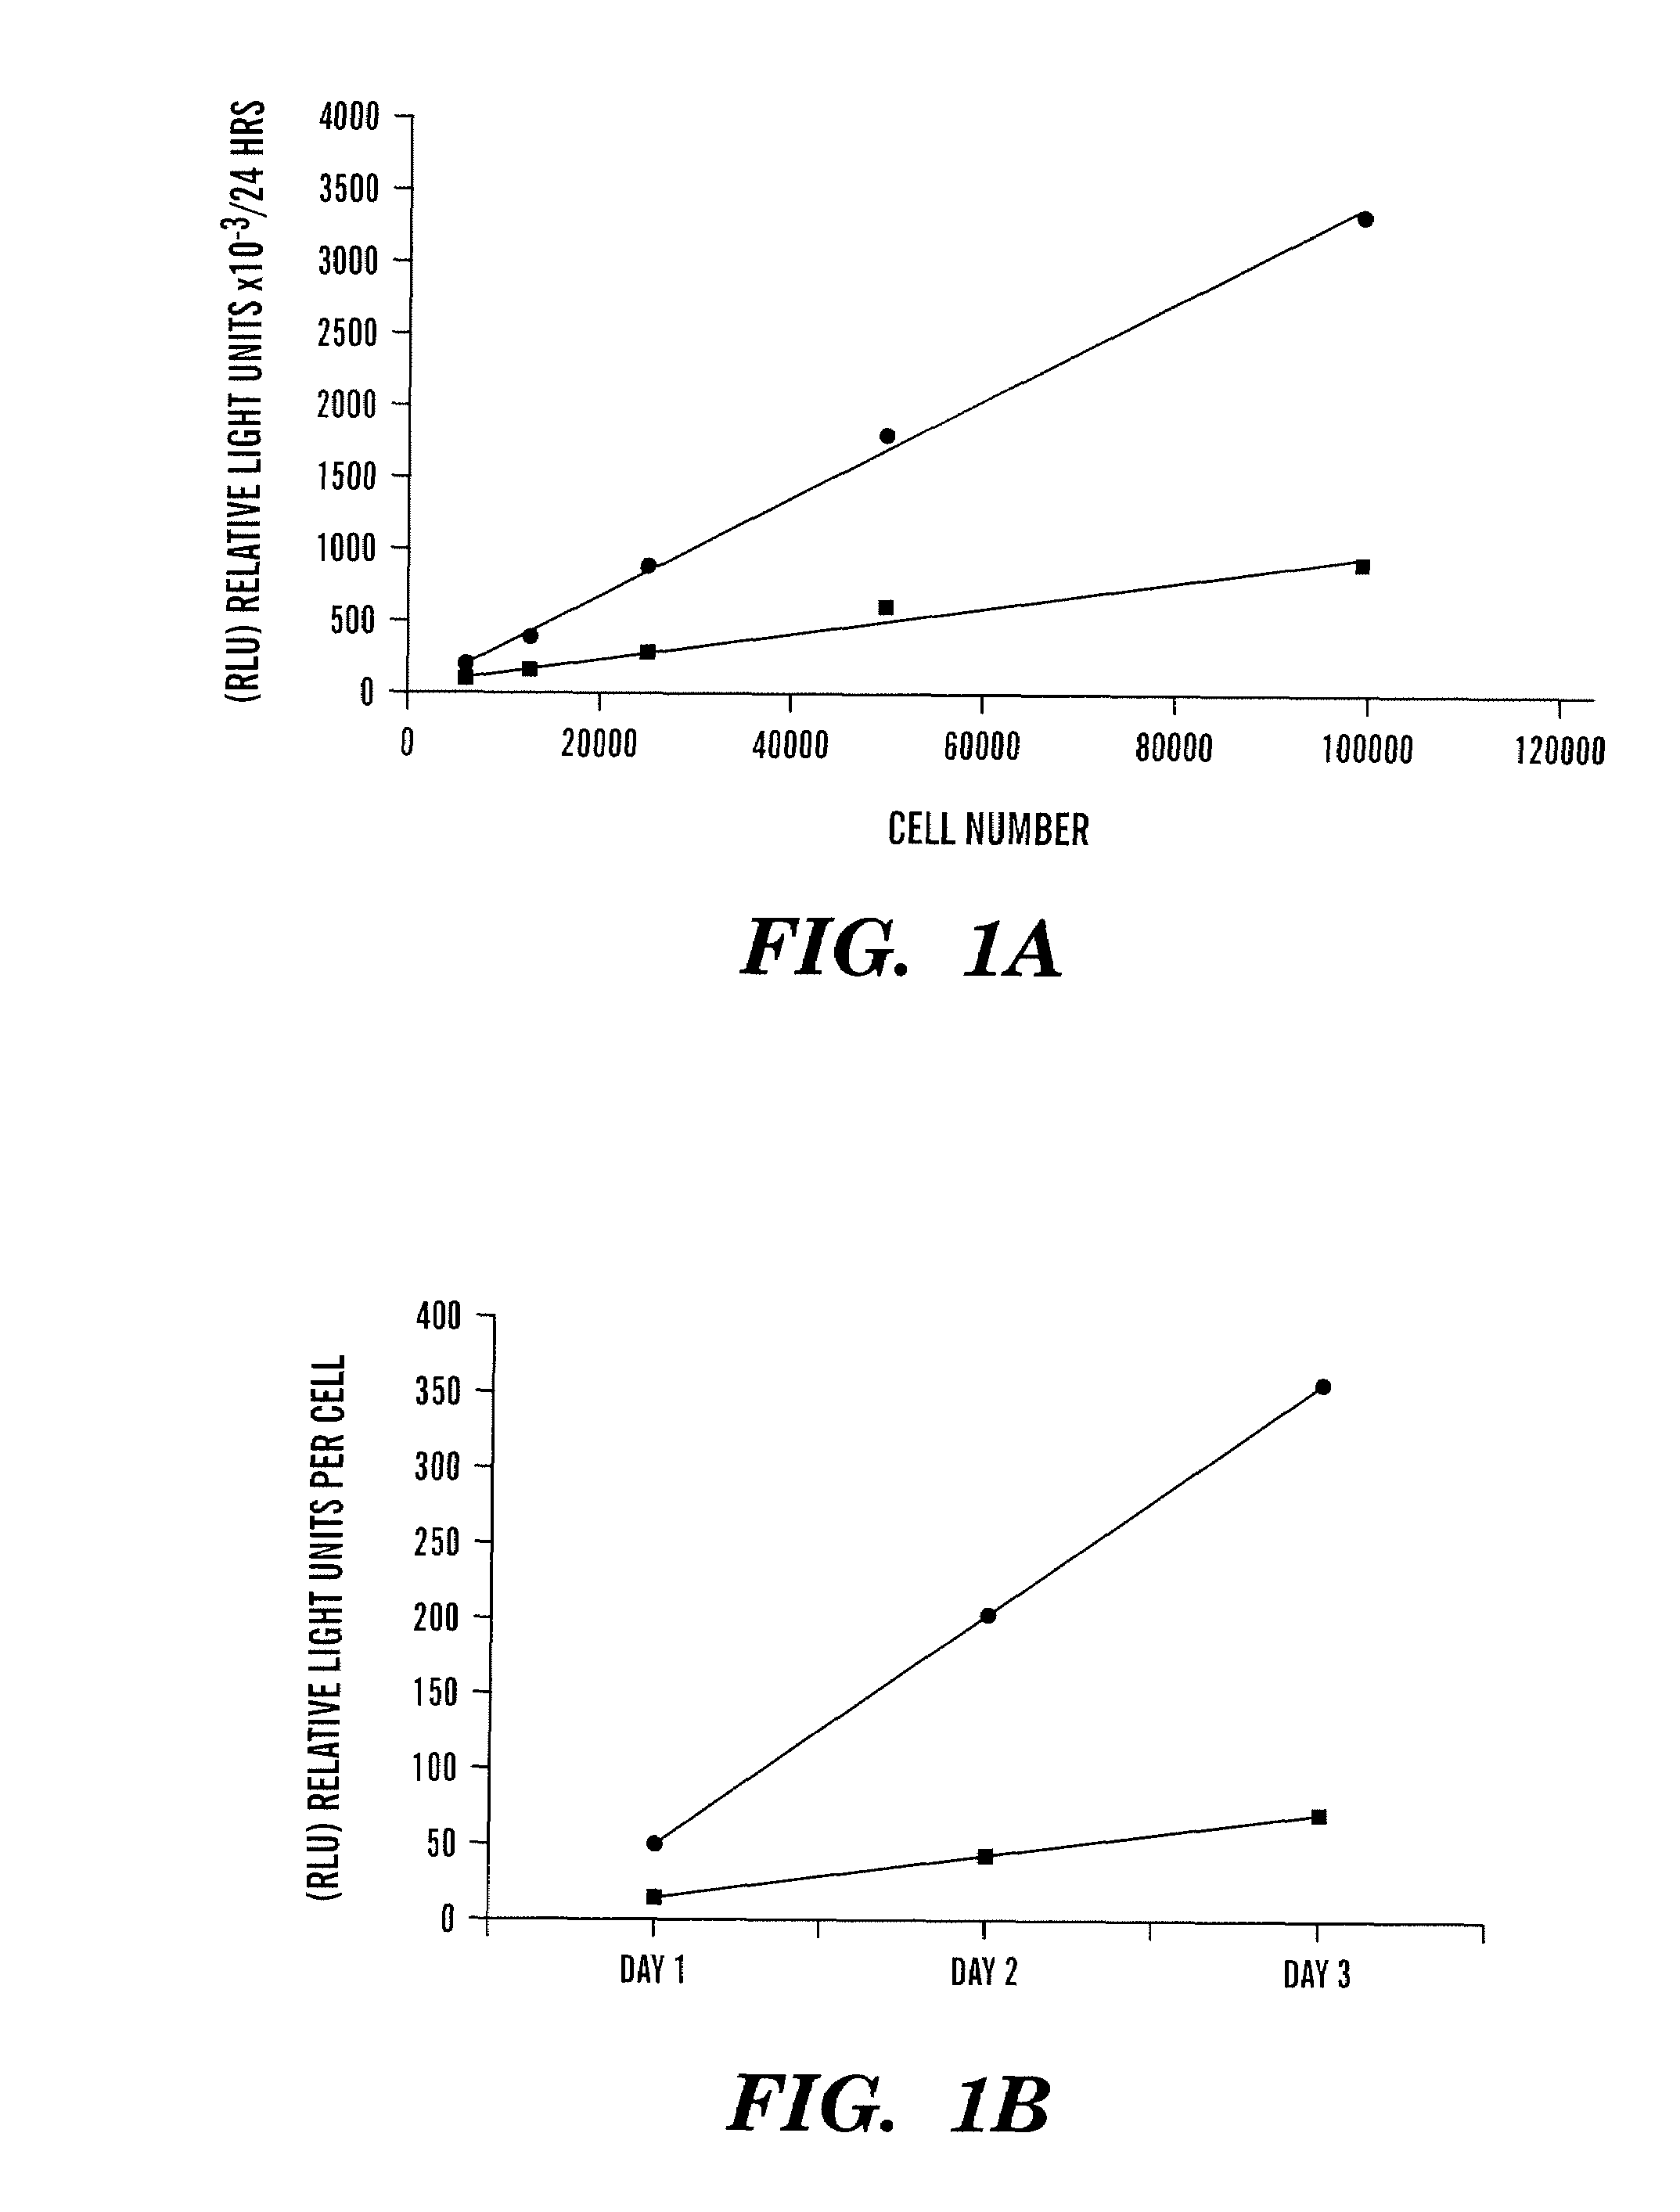 Secreted Luciferase Fluorescent Protein Conjugate Nucleic Acid Construct and Uses Thereof